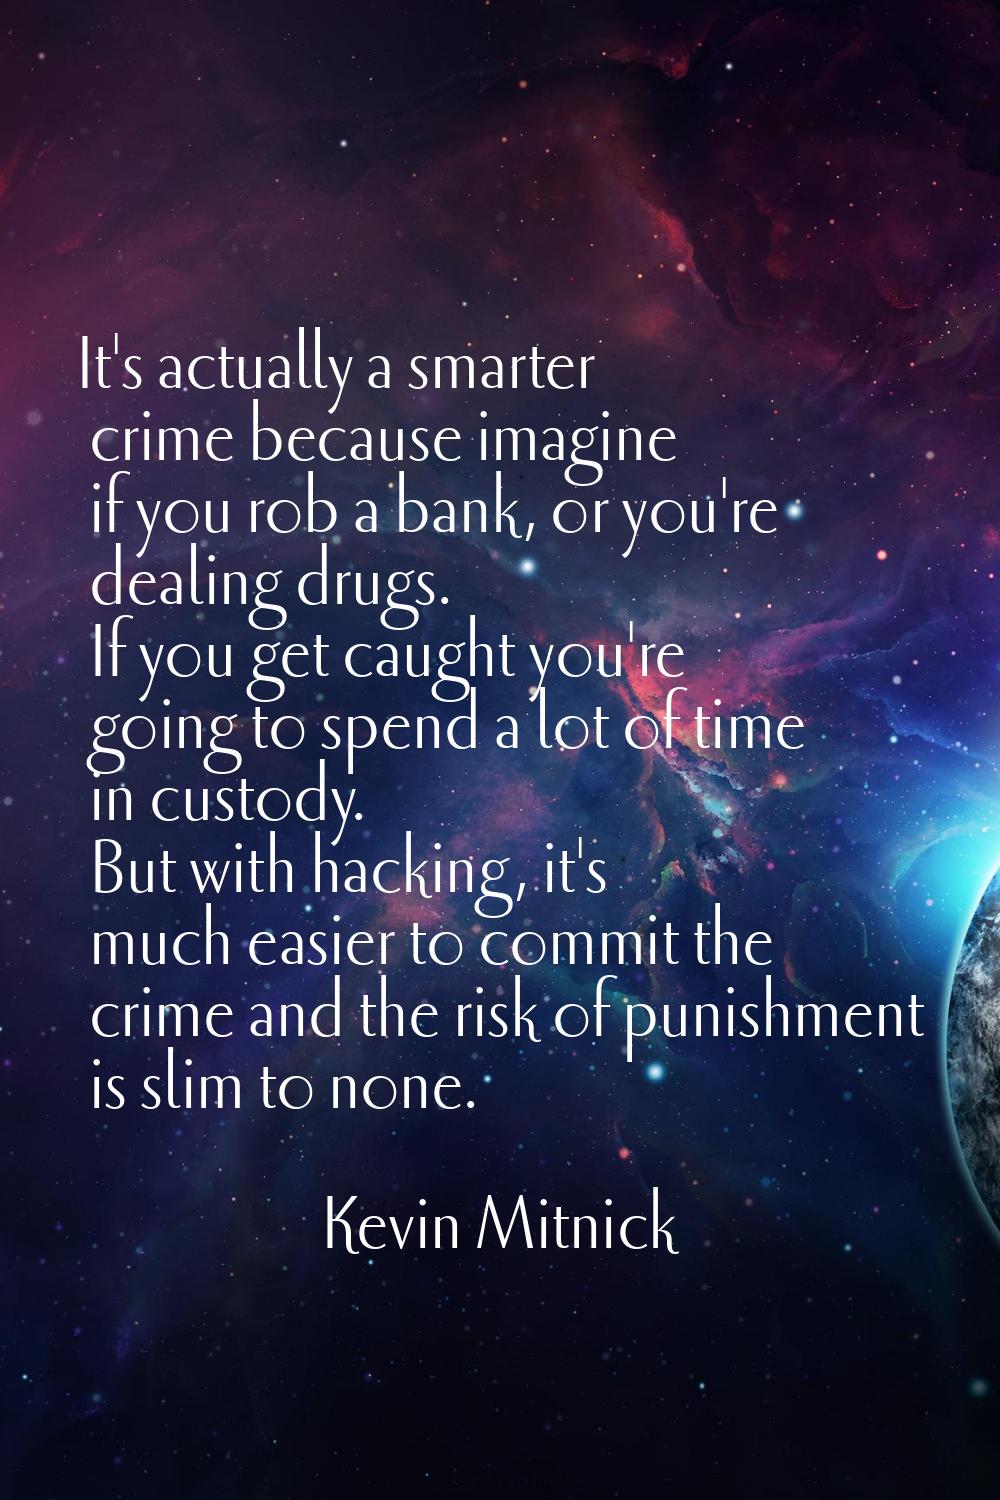 It's actually a smarter crime because imagine if you rob a bank, or you're dealing drugs. If you ge